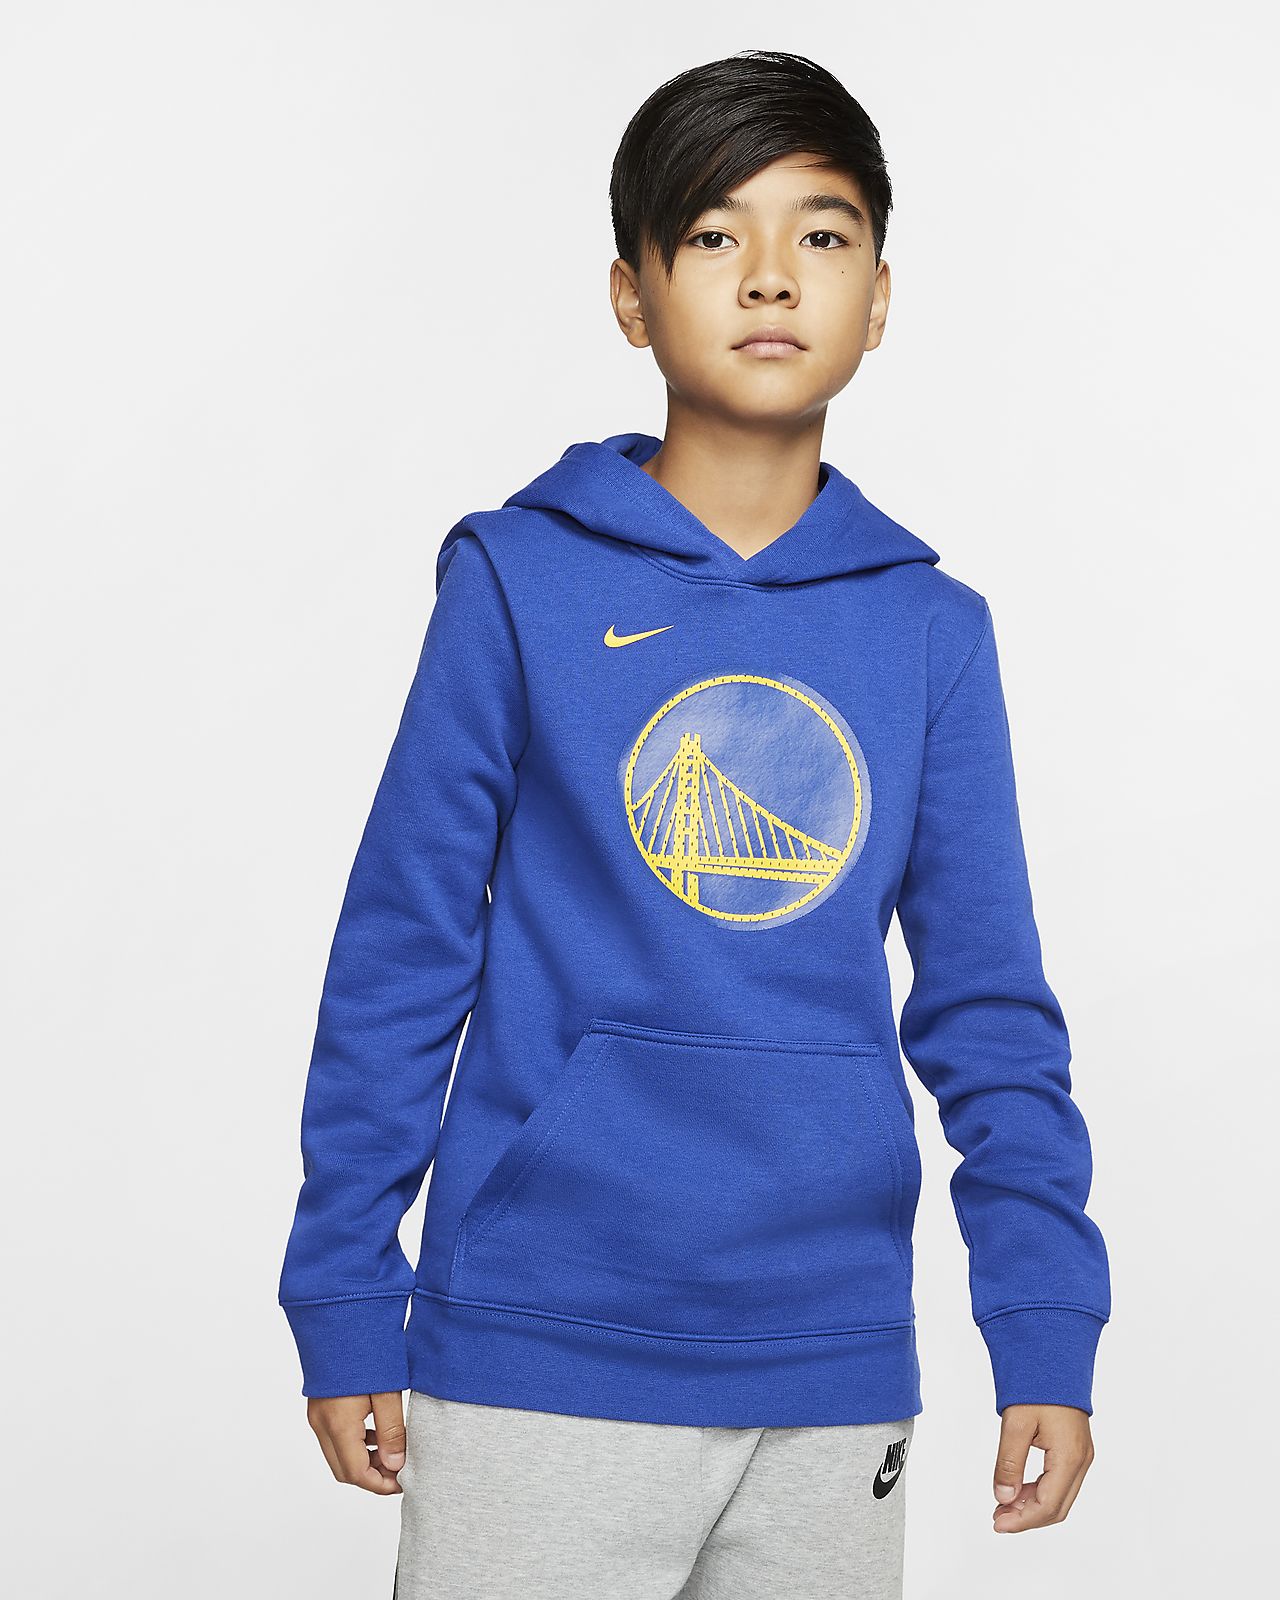 Nike Youth Golden State Warriors Hoodie Deals, 20 OFF   www ...